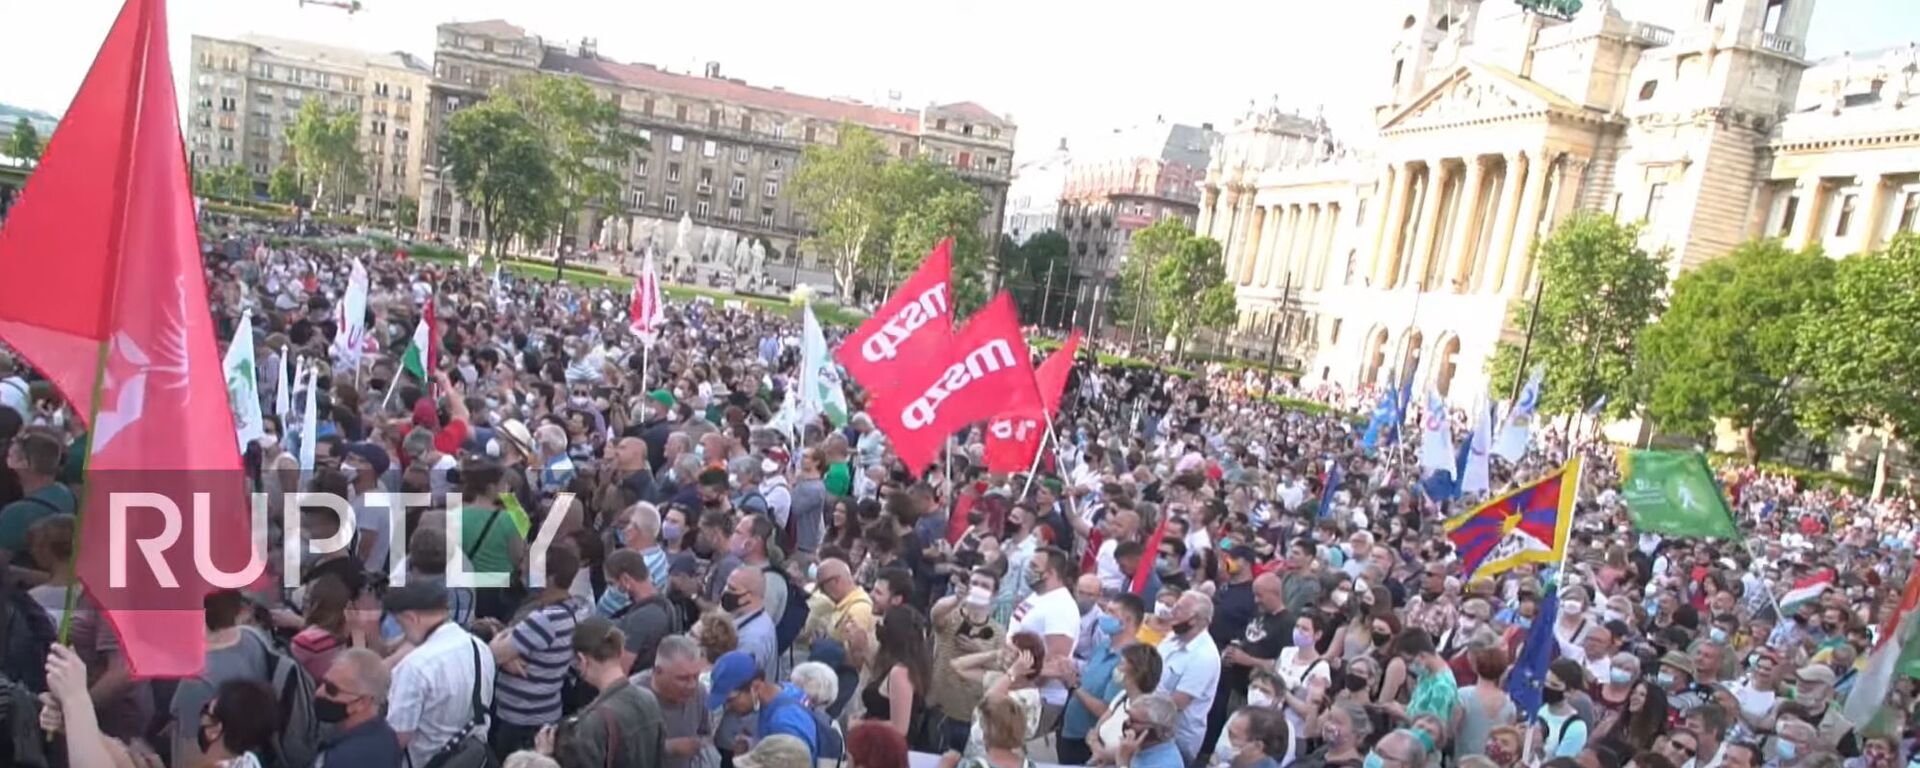 Hungary: Thousands protest against construction of Chinese university campus in Budapest - Sputnik Молдова, 1920, 07.06.2021